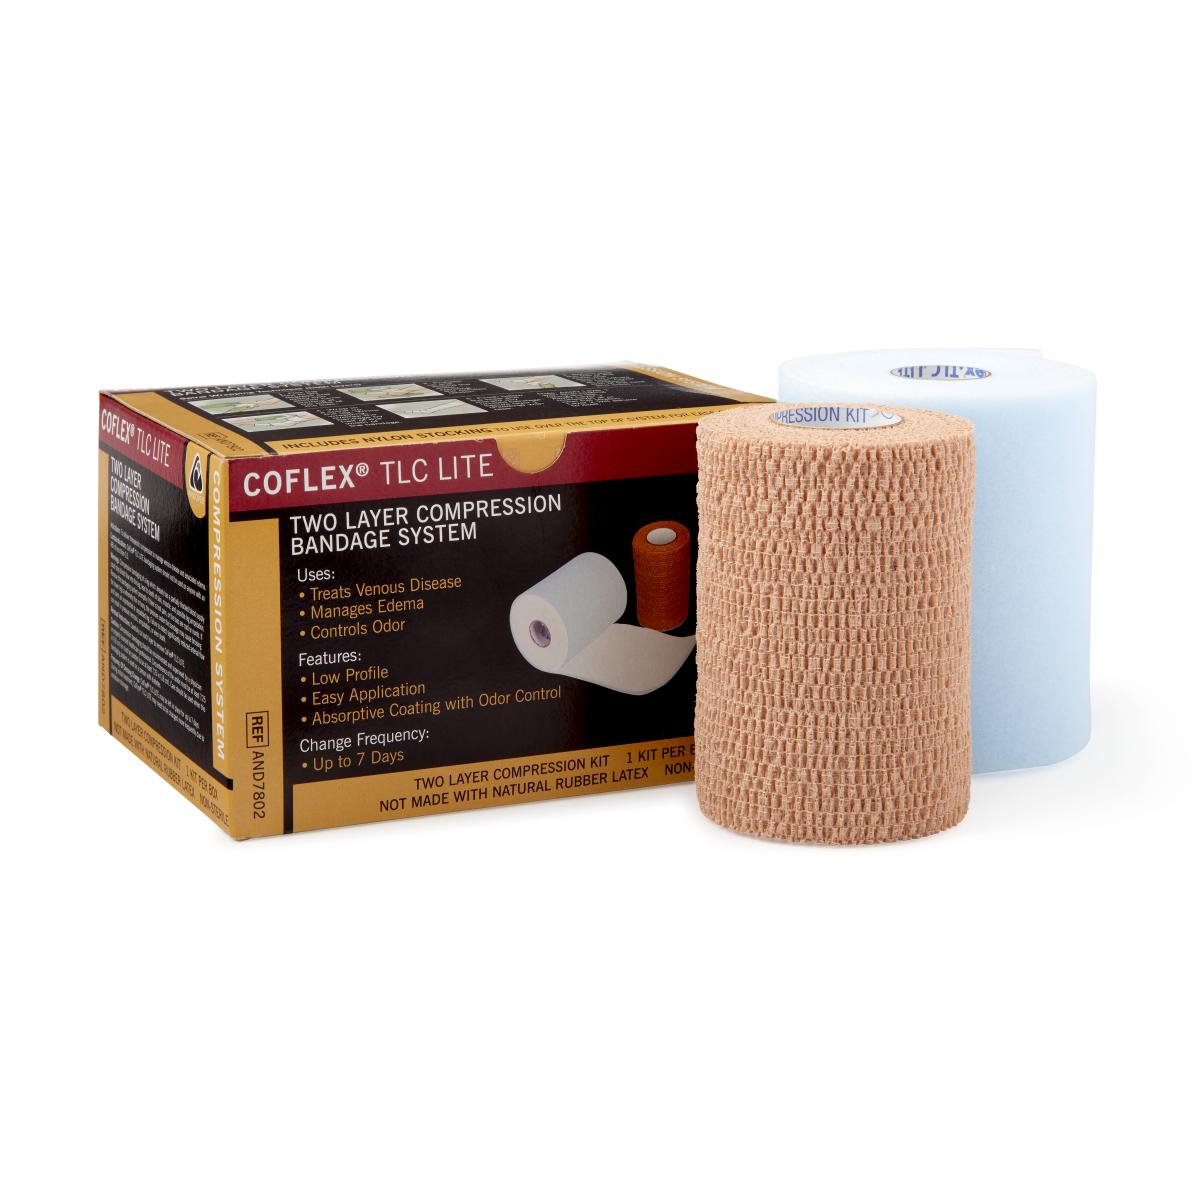 1 Each-Each / Leg / Max: 7 Day: Check Drainage Wound Care - MEDLINE - Wasatch Medical Supply